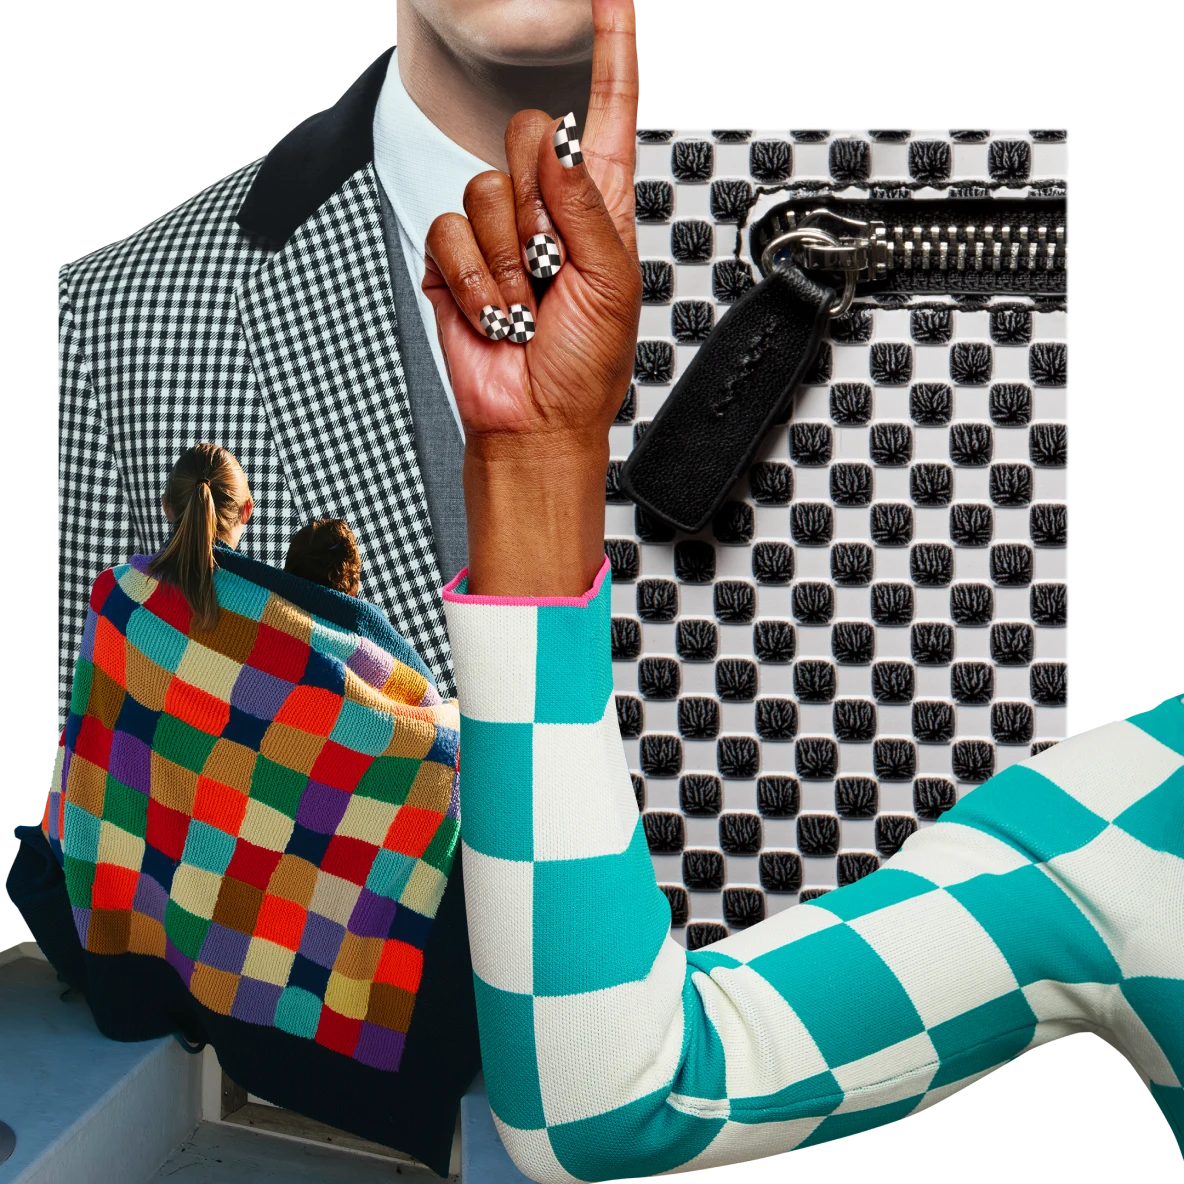 A Black woman’s hand is in the centre, with black and white chequered nails; the index finger is raised in a number one and the arm is in a long-sleeved green and white chequered shirt. A black and white chequered wallet and a man in a chequered suit with a black collar are in the background.